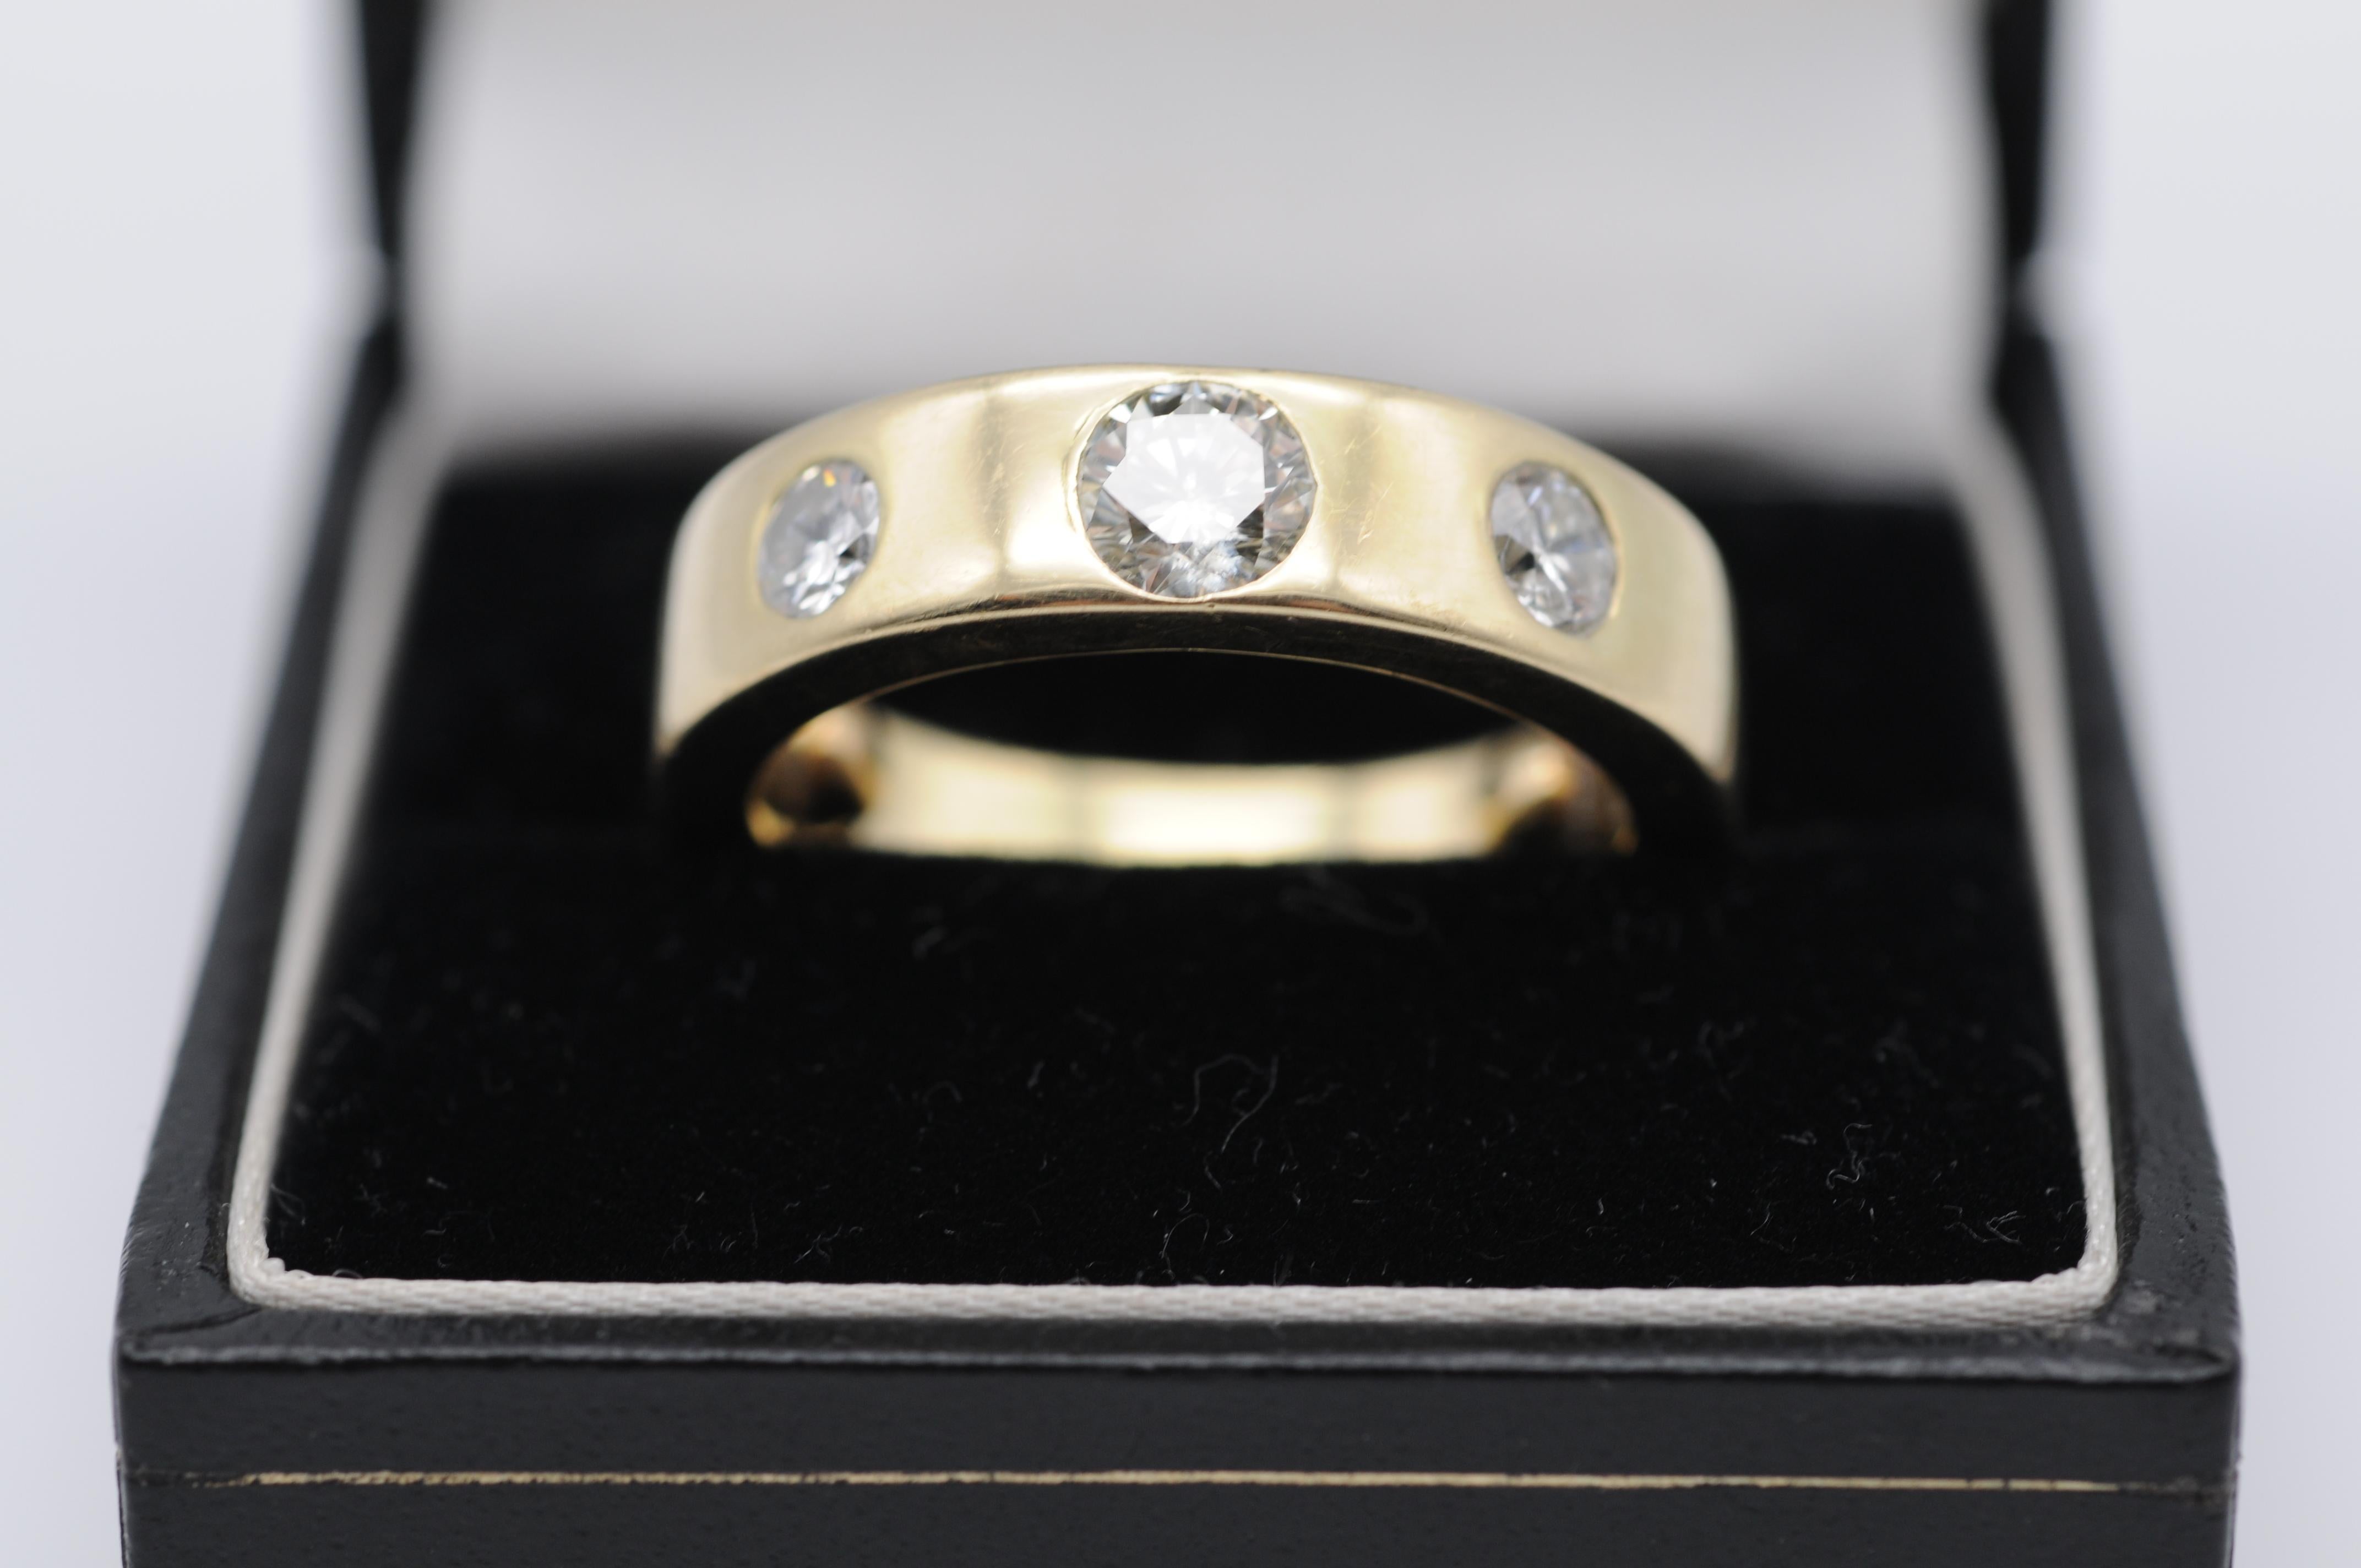 Step into the world of sophistication and elegance with this 14k yellow gold diamond band ring. The classic design features three exquisite diamonds that will captivate anyone who beholds them.

The center diamond is a stunning 0.55 carat stone,